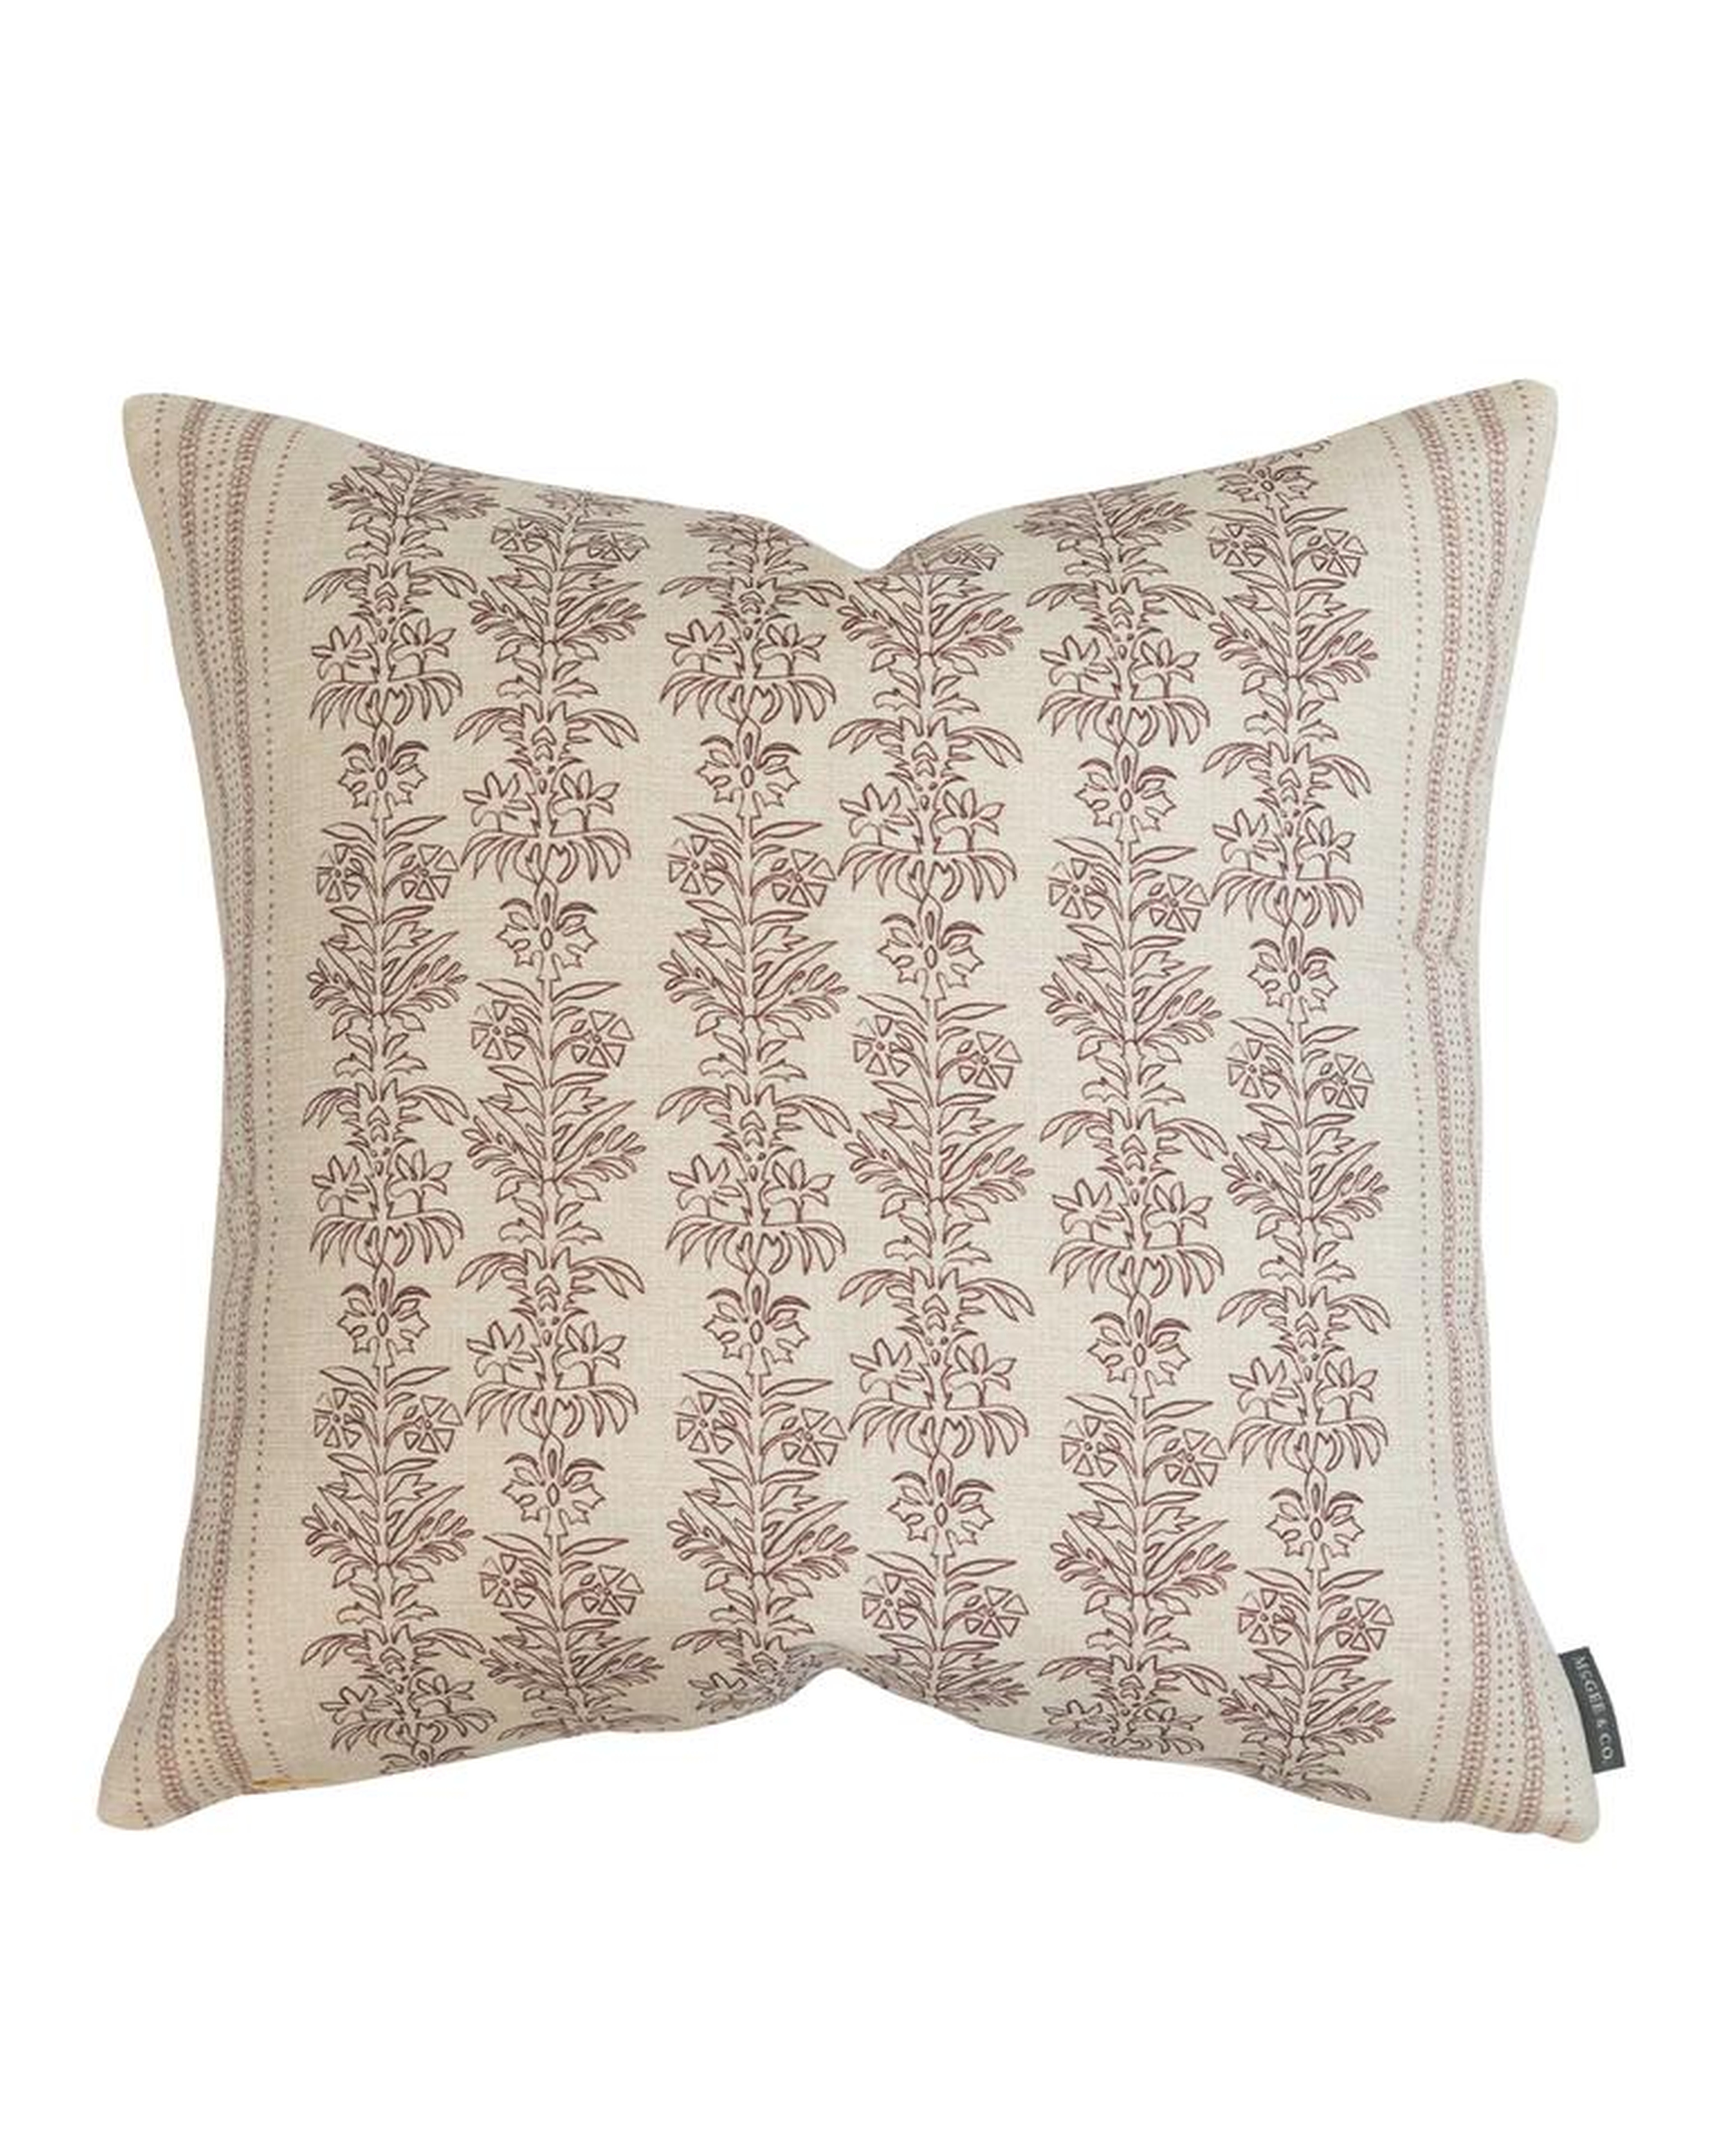 DEMI FLORAL STRIPE PILLOW COVER, 24" - McGee & Co.